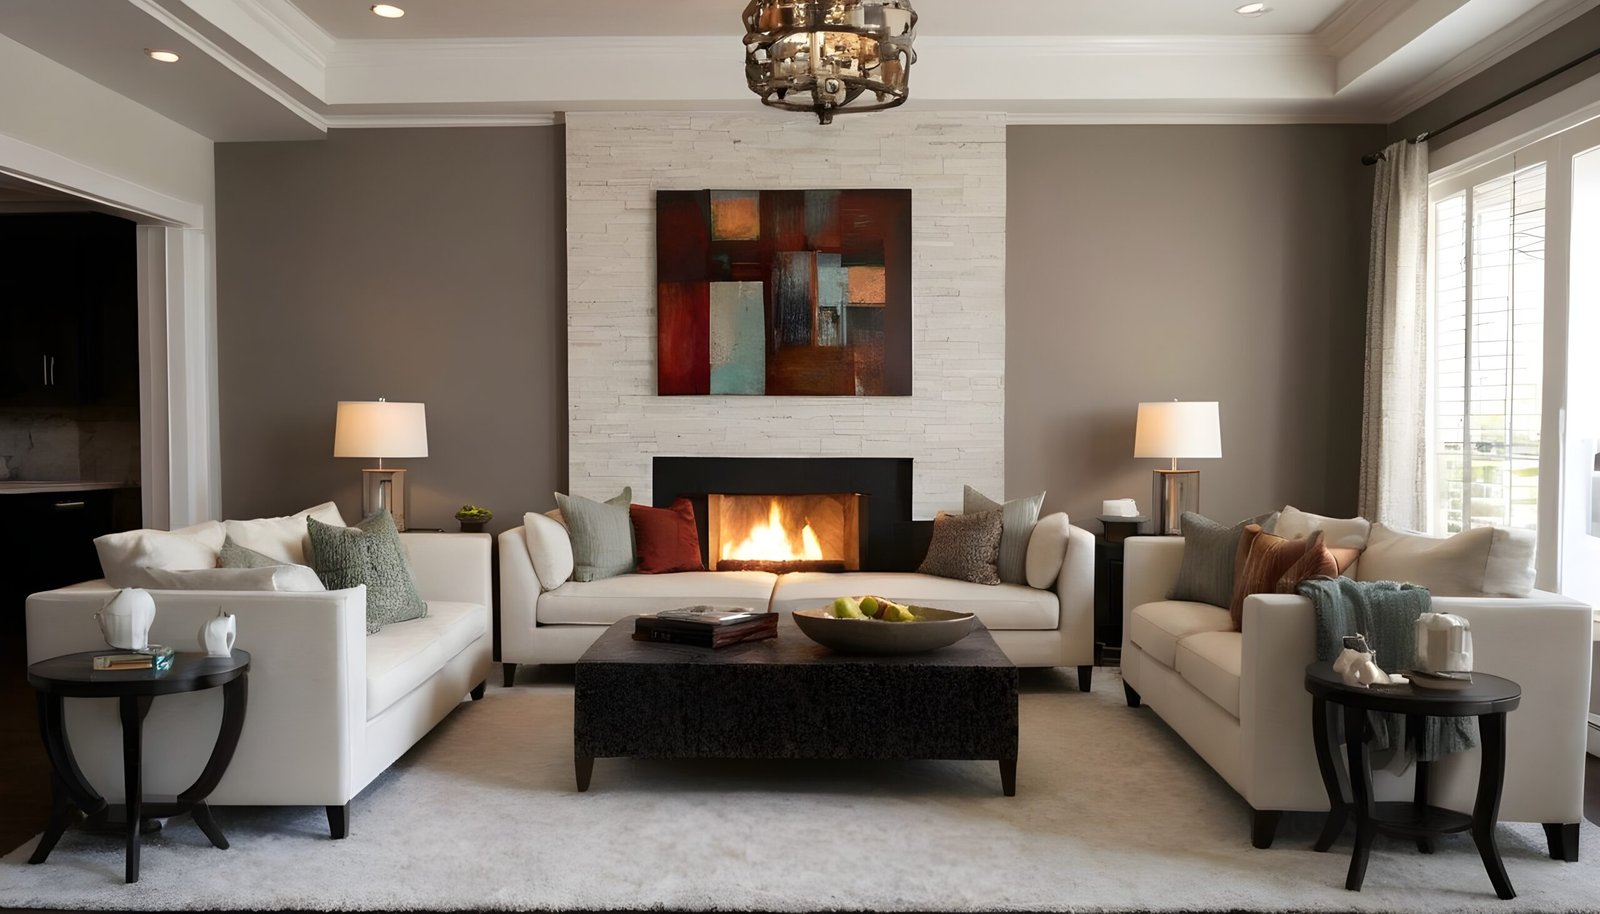 A cozy living room with beige couches in transitional interior design.